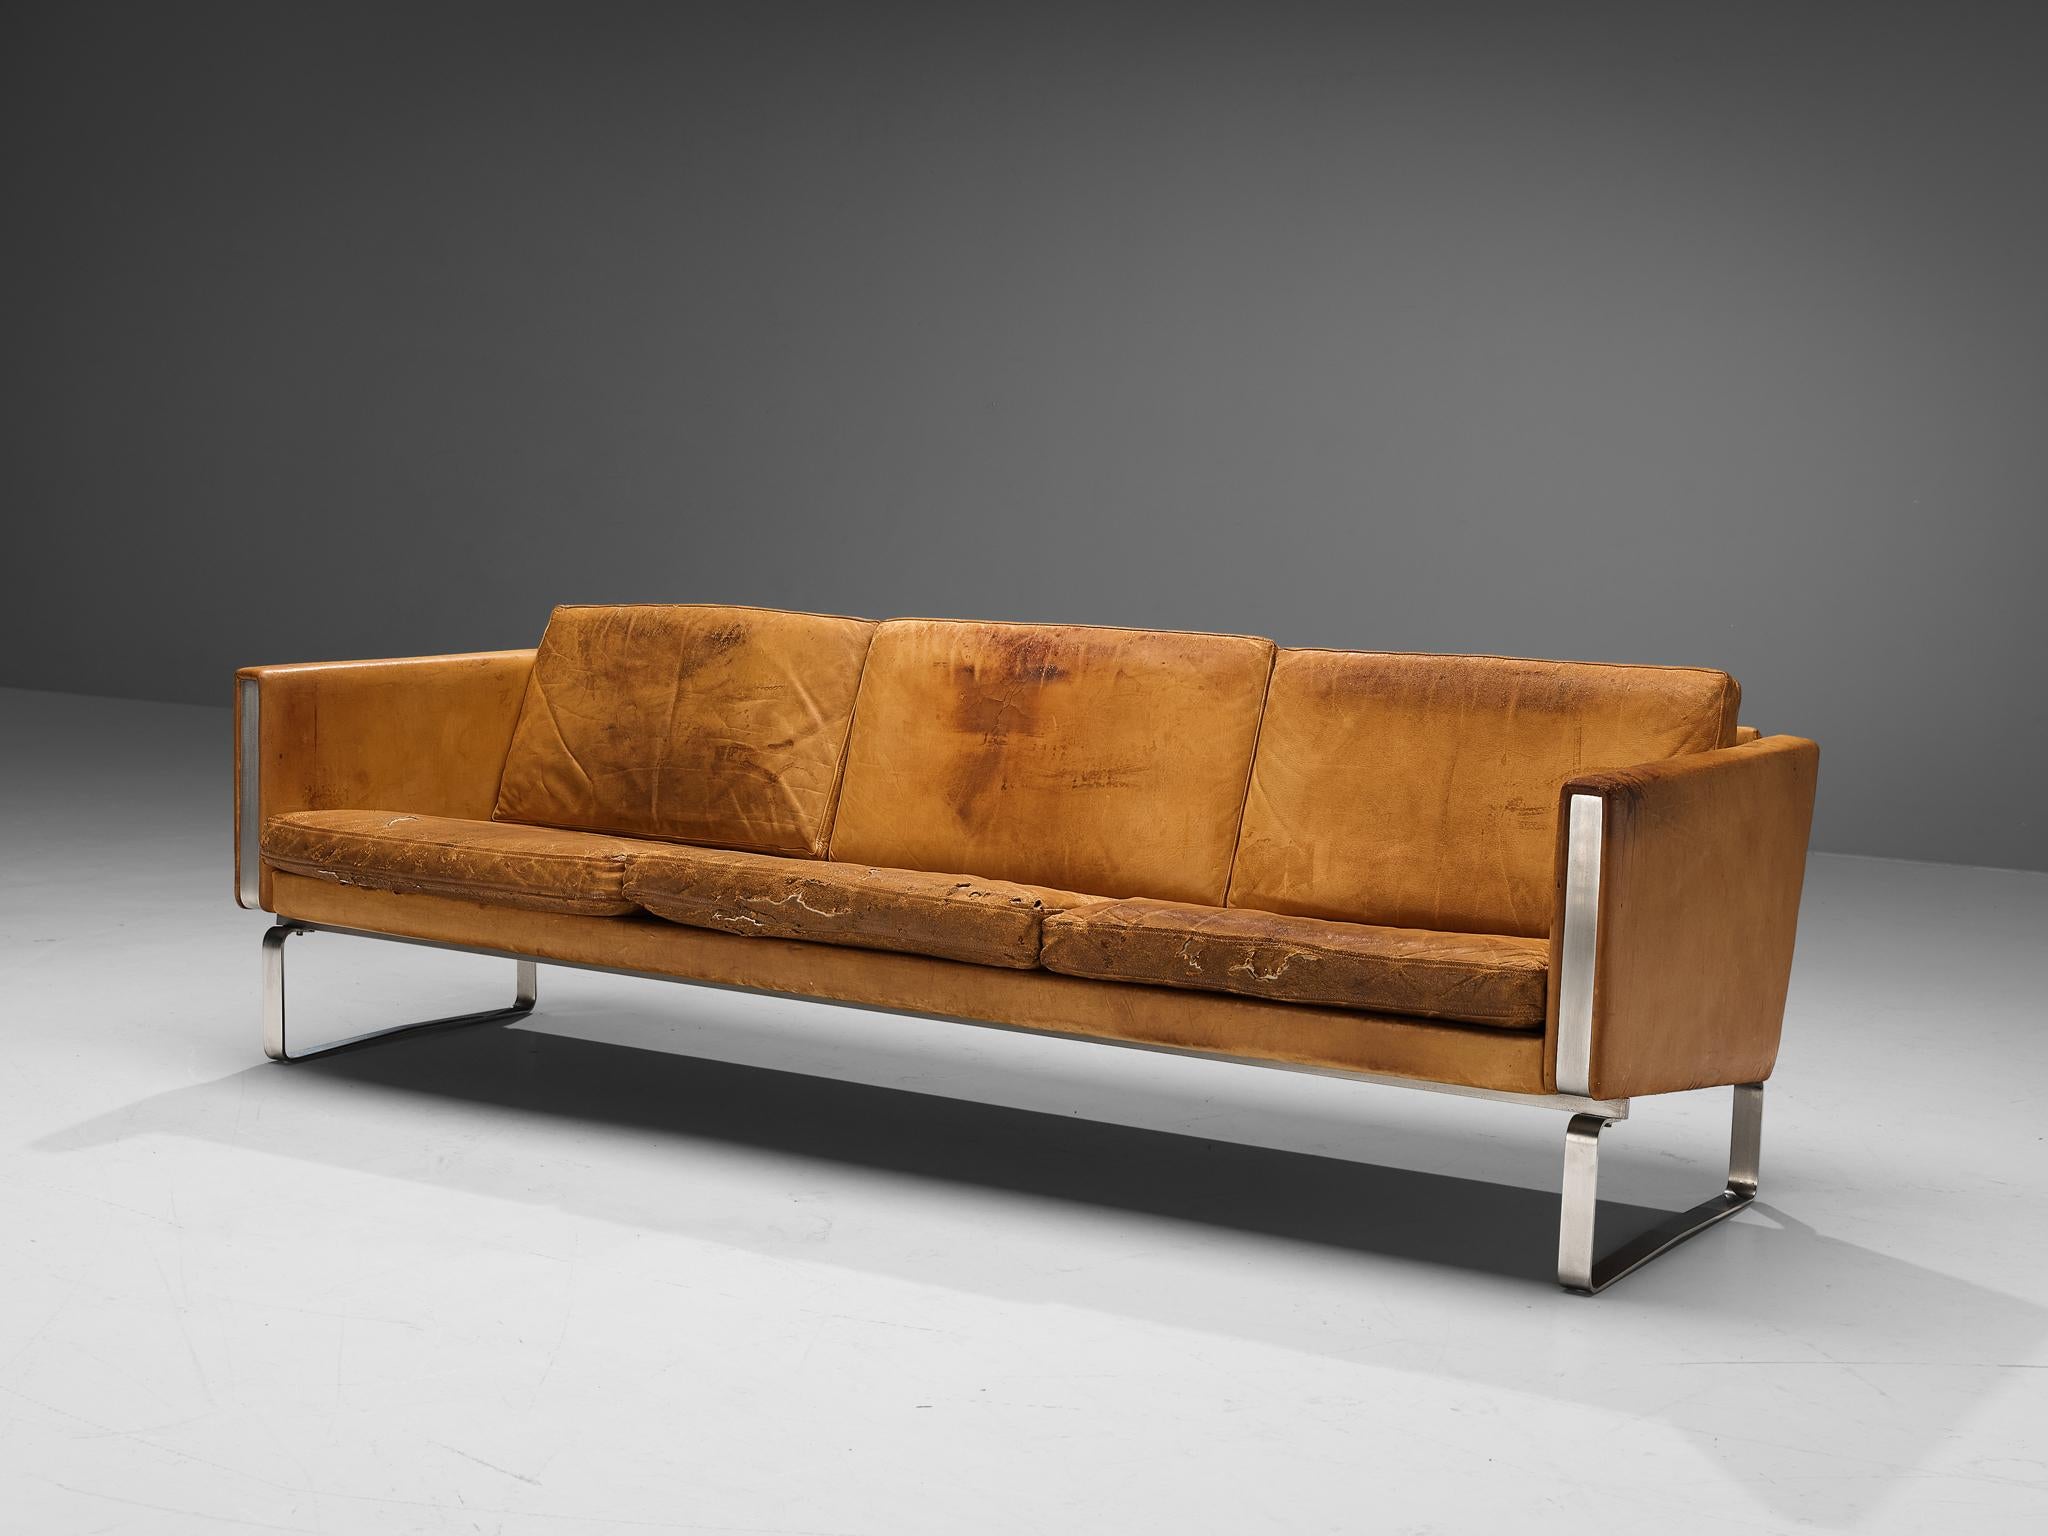 Hans J. Wegner for Carl Hansen & Søn, sofa, model 'CH103', leather, metal, Denmark, 1970s

The CH103 sofa by Hans J. Wegner for Carl Hansen & Søn is a modern three-seat sofa ideal for contemporary interiors. This cognac leather sofa with a square